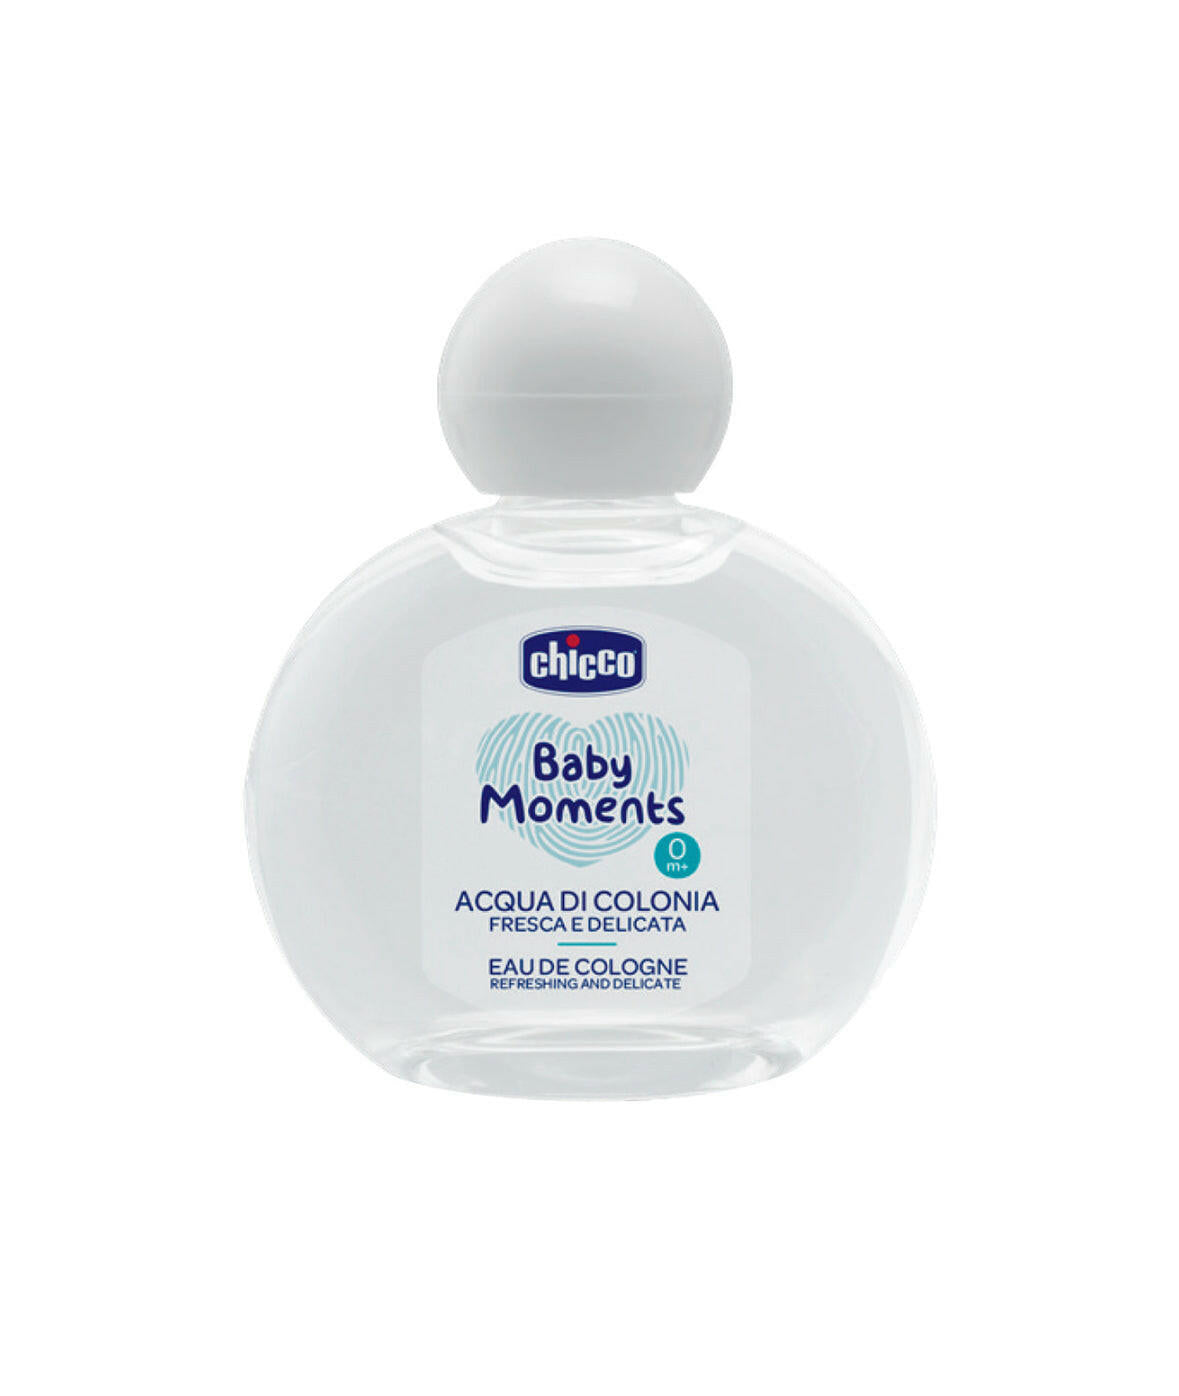 Chicco - Baby Moments EDC Refreshing And Delicate - 100ml.